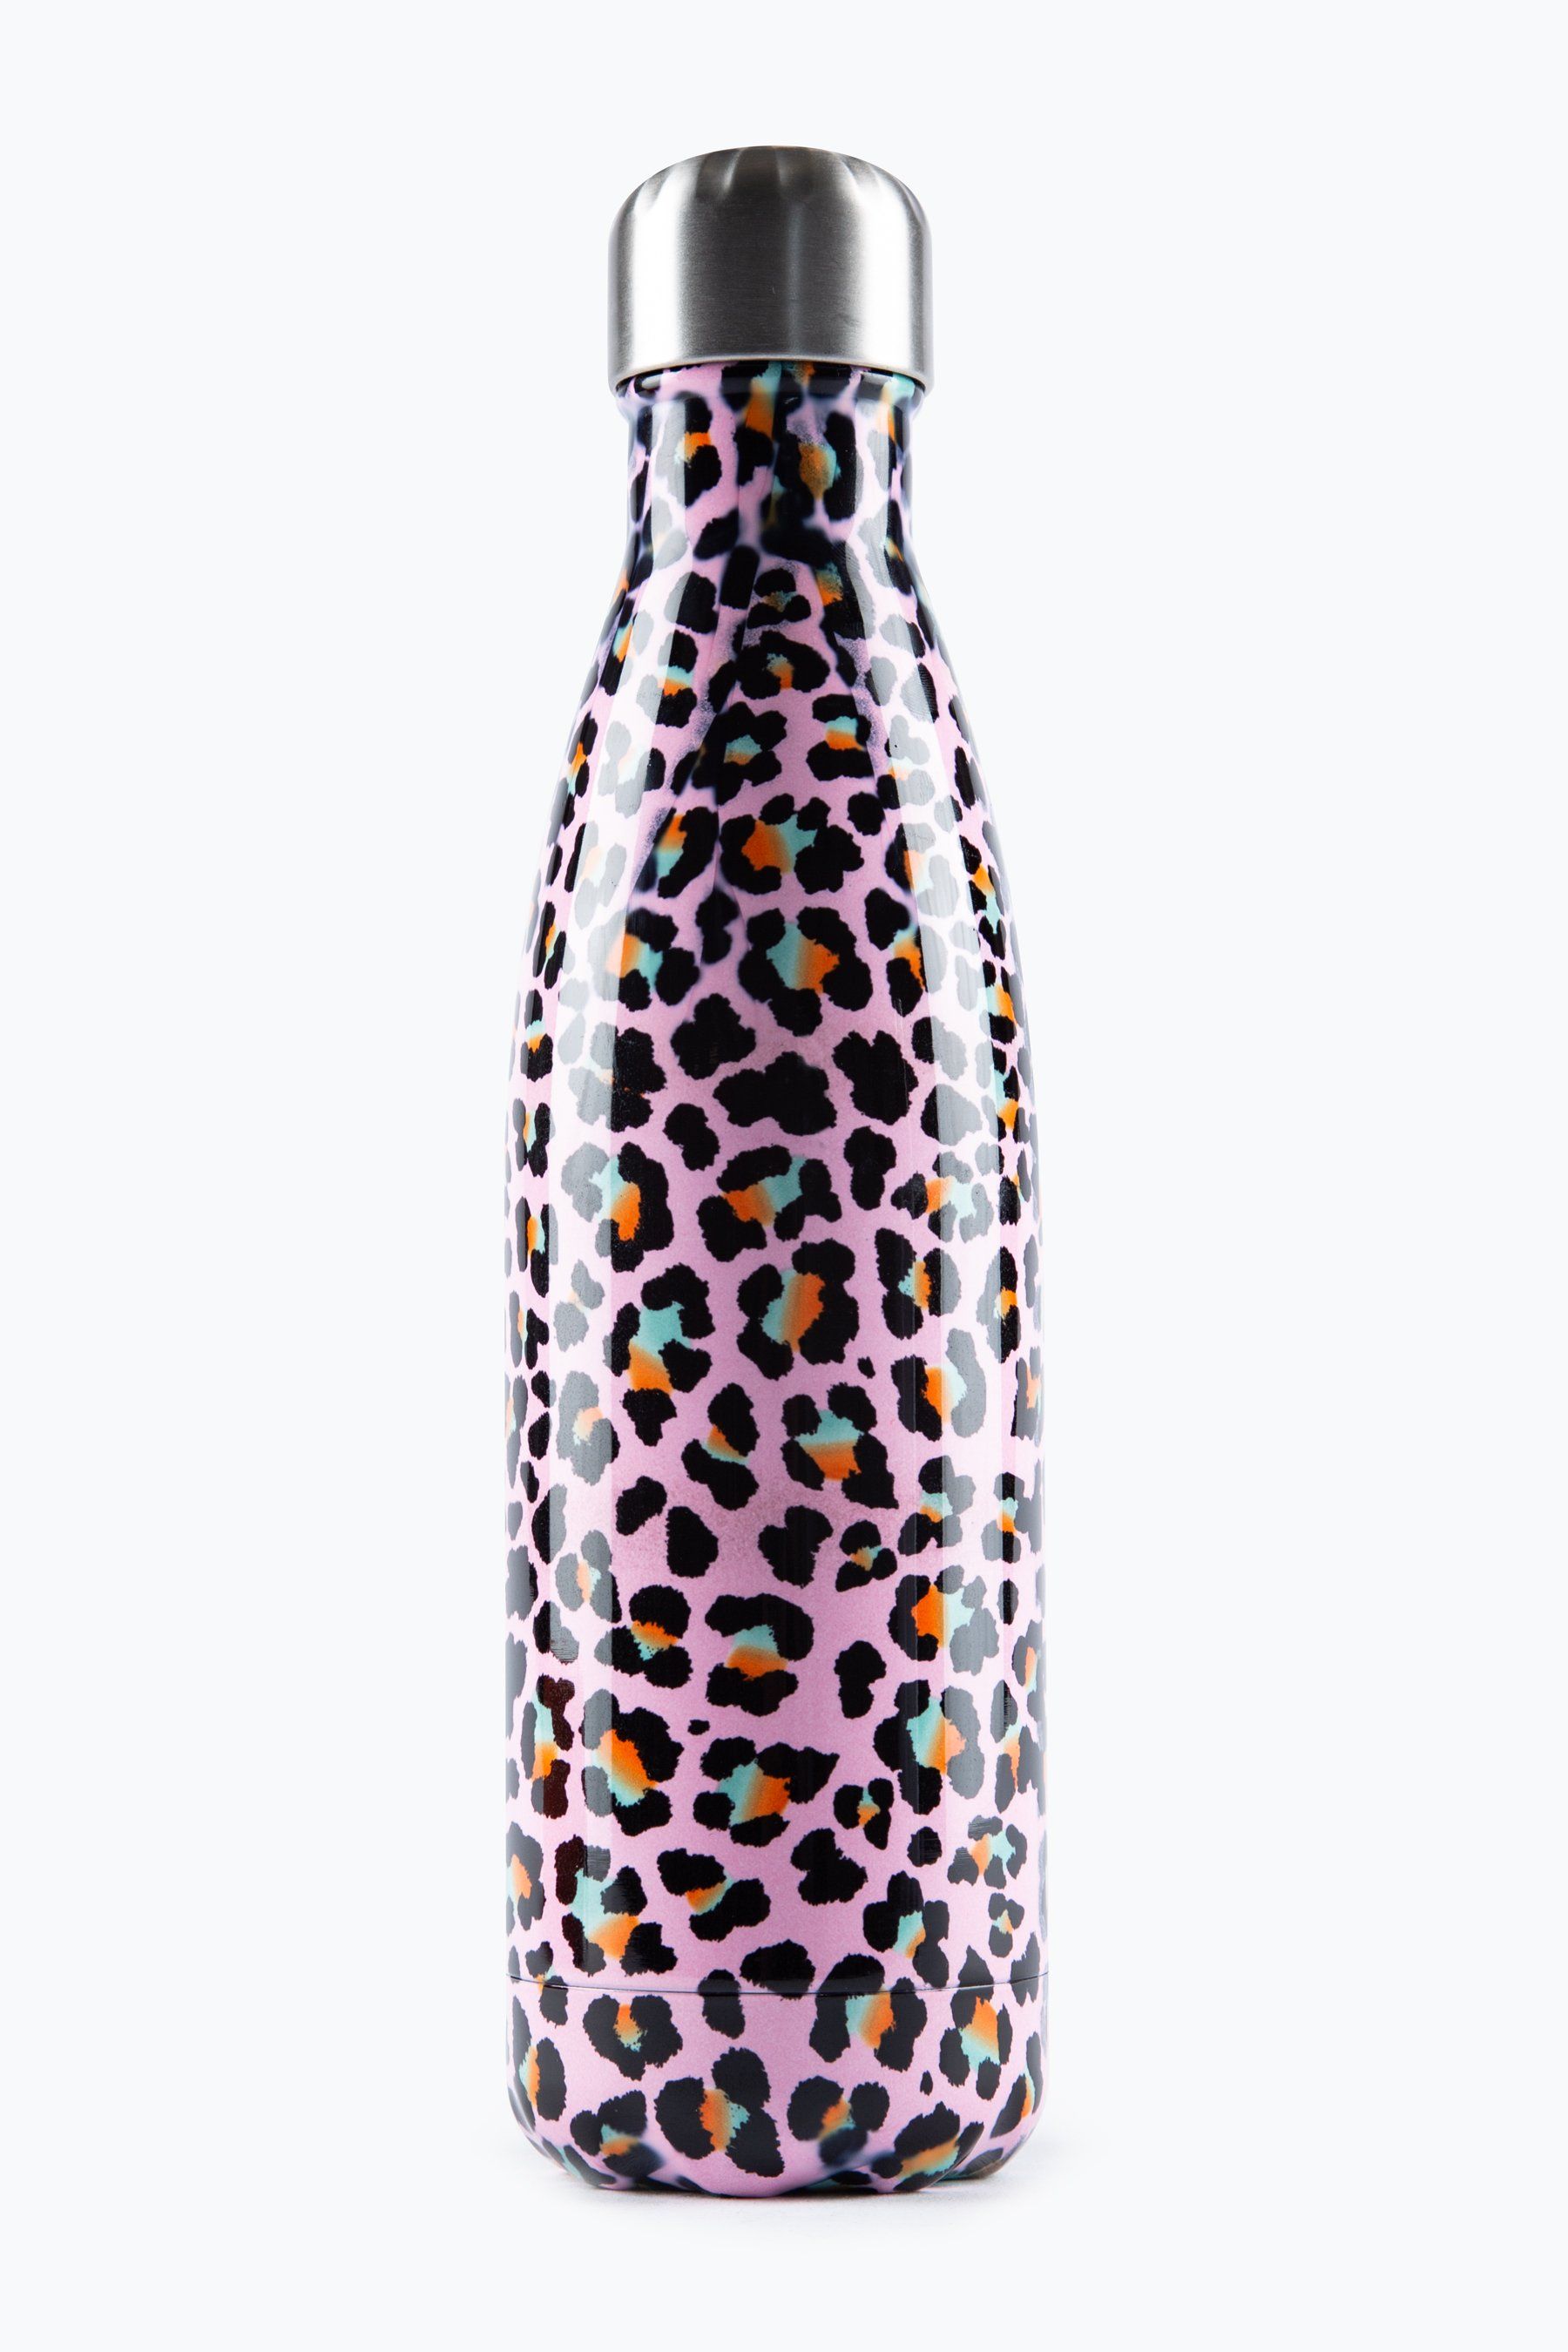 Keeping you hydrated, in style. Meet the HYPE. Disco Leopard Reusable Water Bottle, perfect for when you're on the go. Designed in Aluminium to ensure your water stays ice-cold and for chillier days, keeping your oat milk latte warm for longer. Reuse it again and again with an airtight screw lid prevents spills. Designed in an all-over leopard inspired print in a pink, orange and mint colour palette. Why not grab one of our lunch bags or backpacks with a bottle holder to complete the look. Hand wash only.